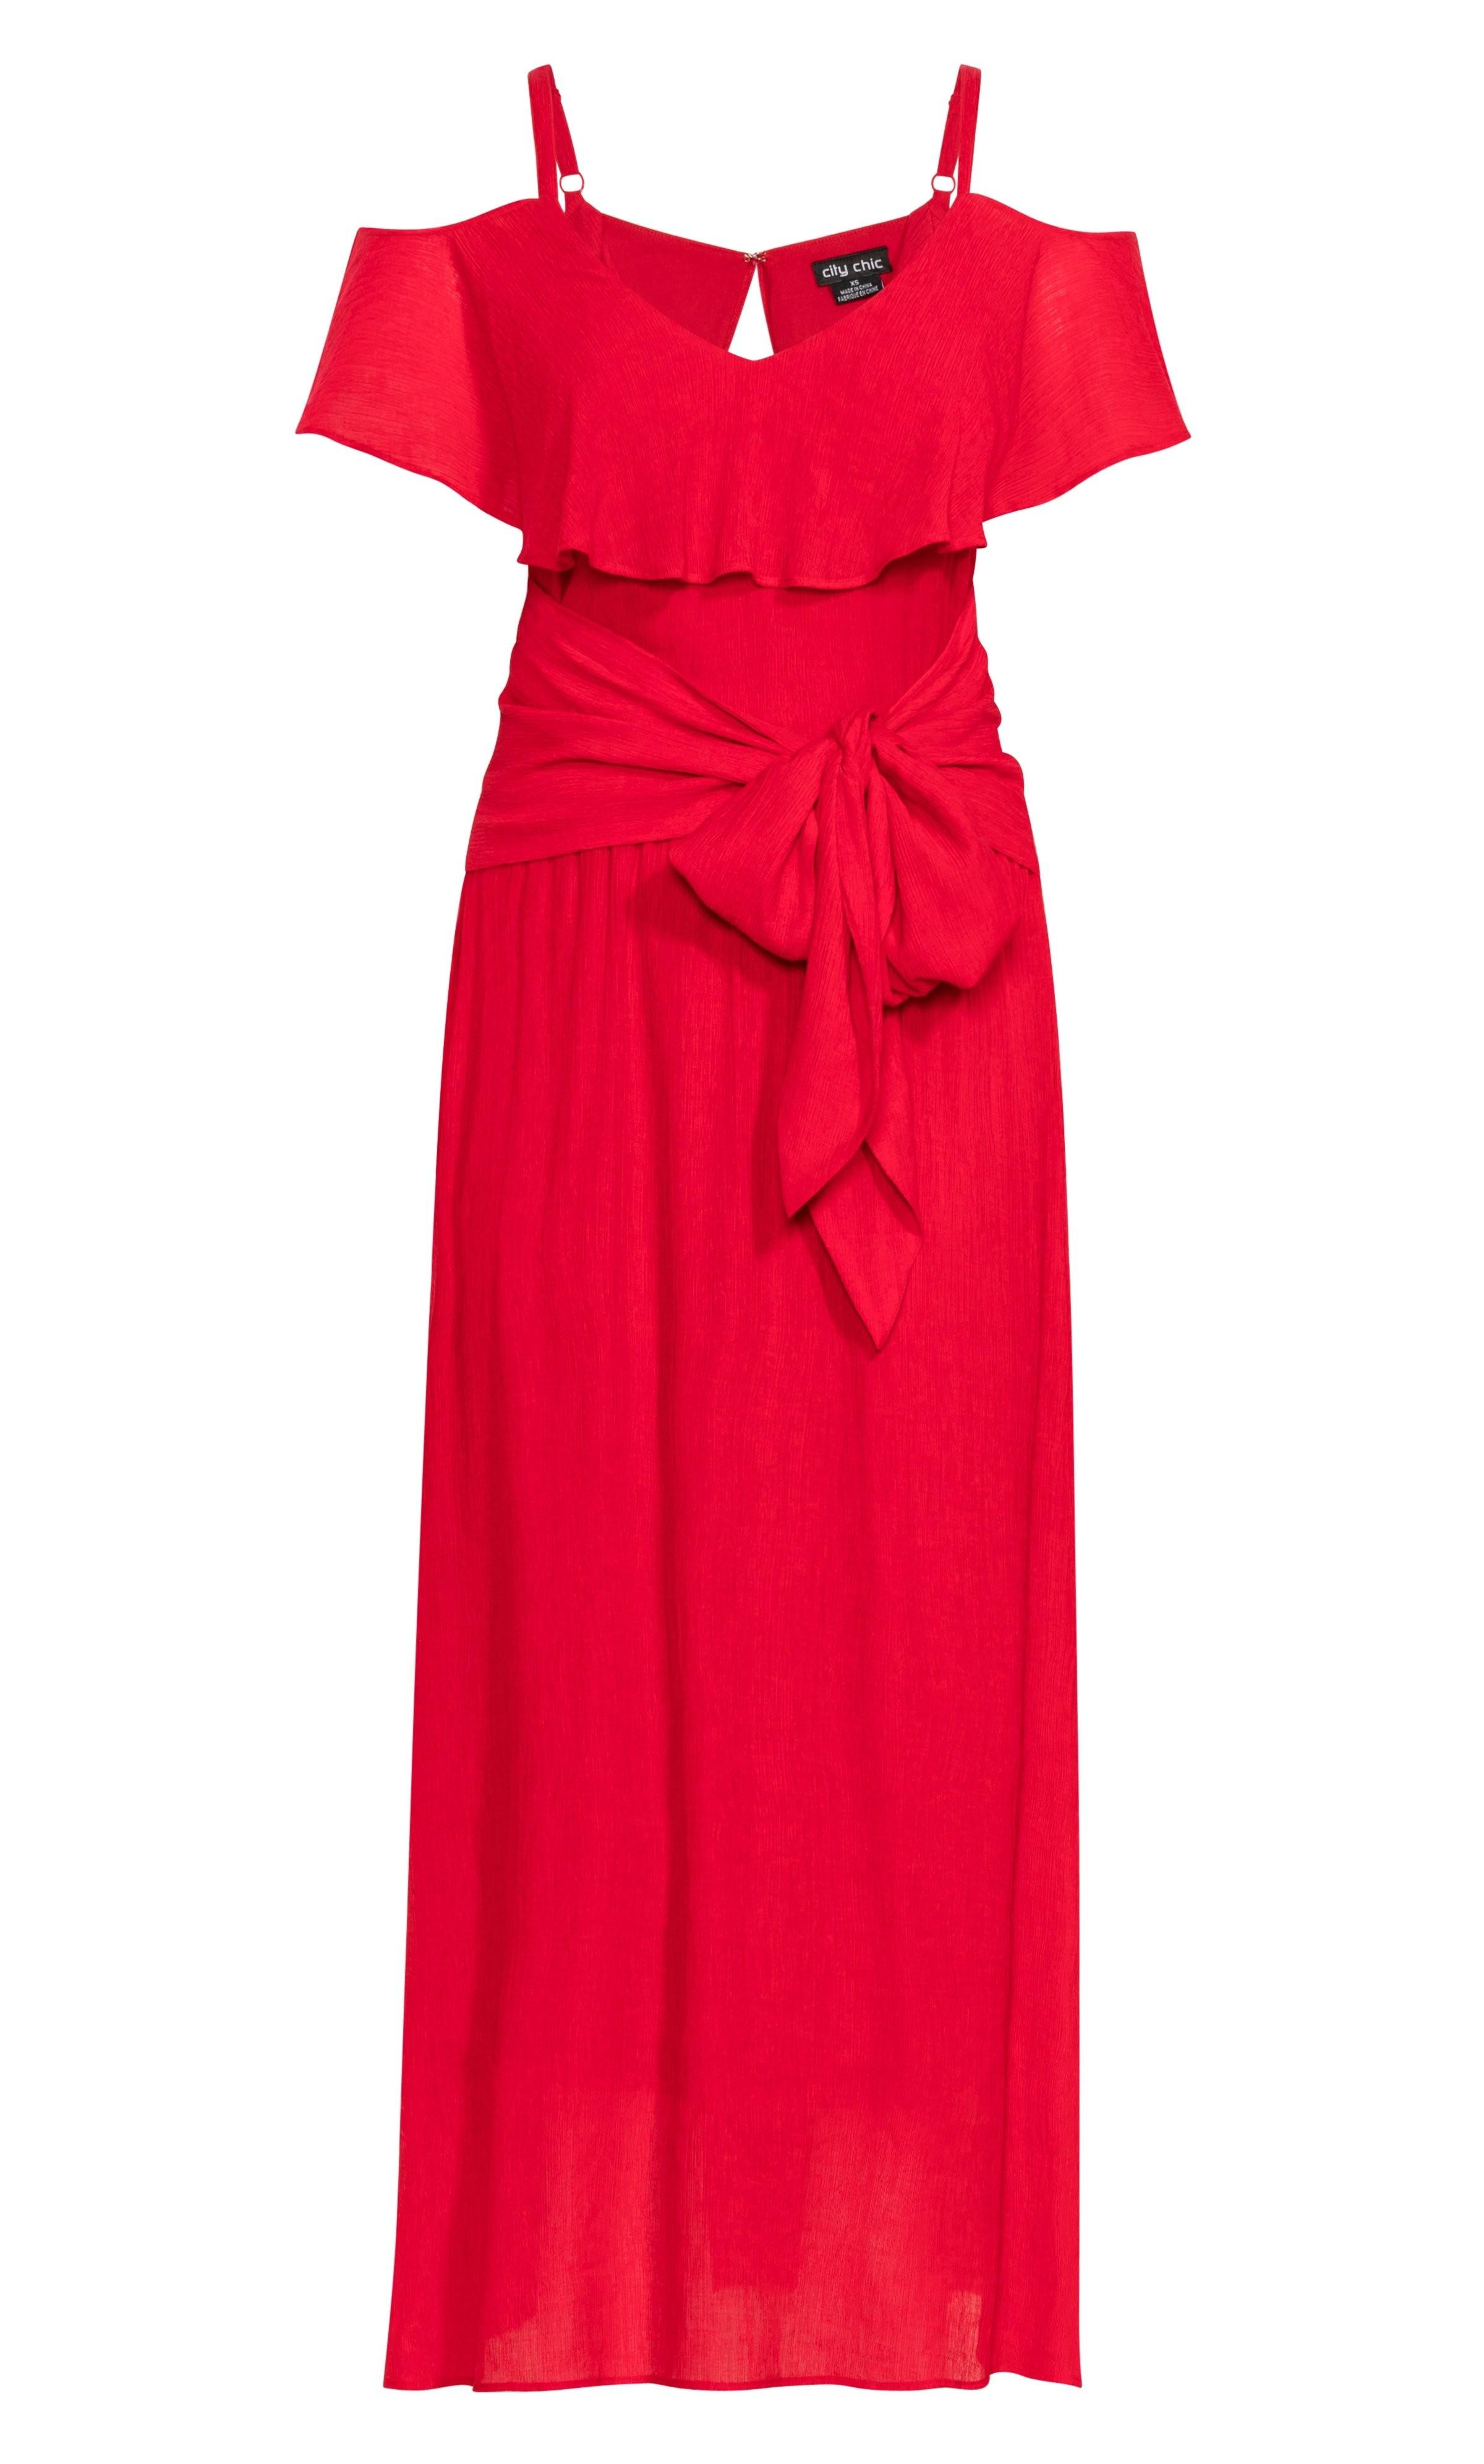 City Chic Synthetic Romantic Tie Dress in Red - Lyst